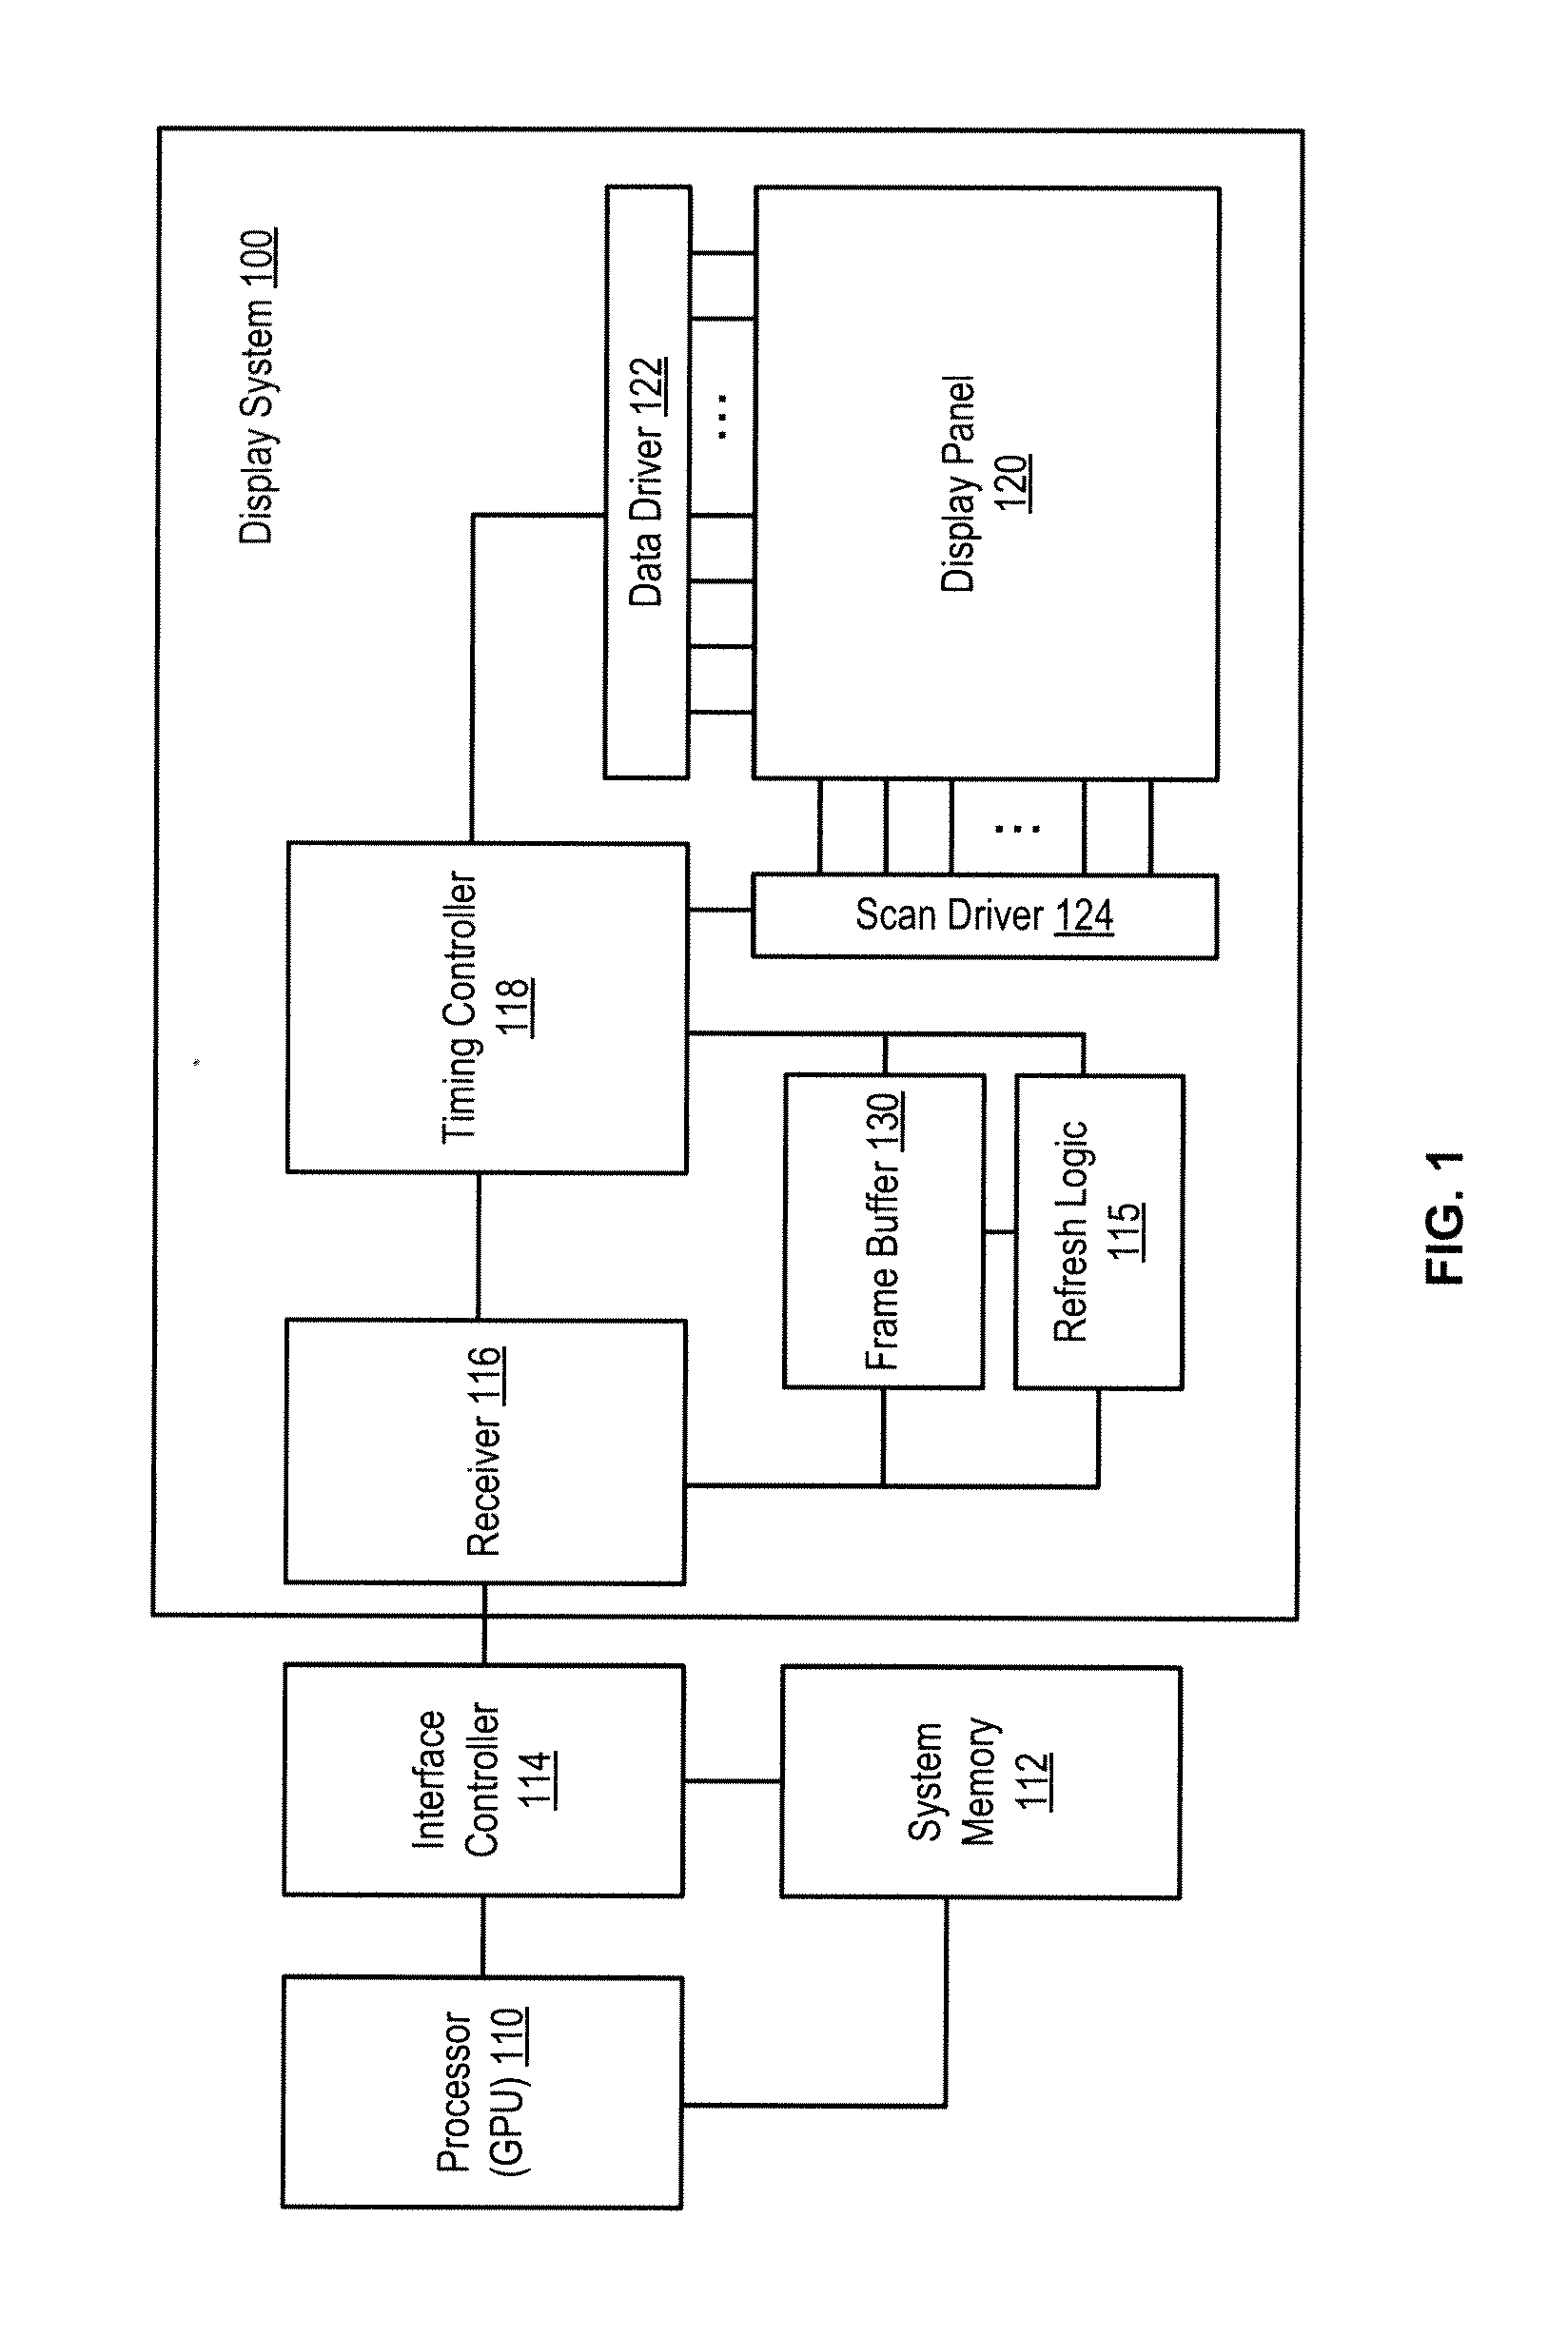 Content-Based Adaptive Refresh Schemes For Low-Power Displays